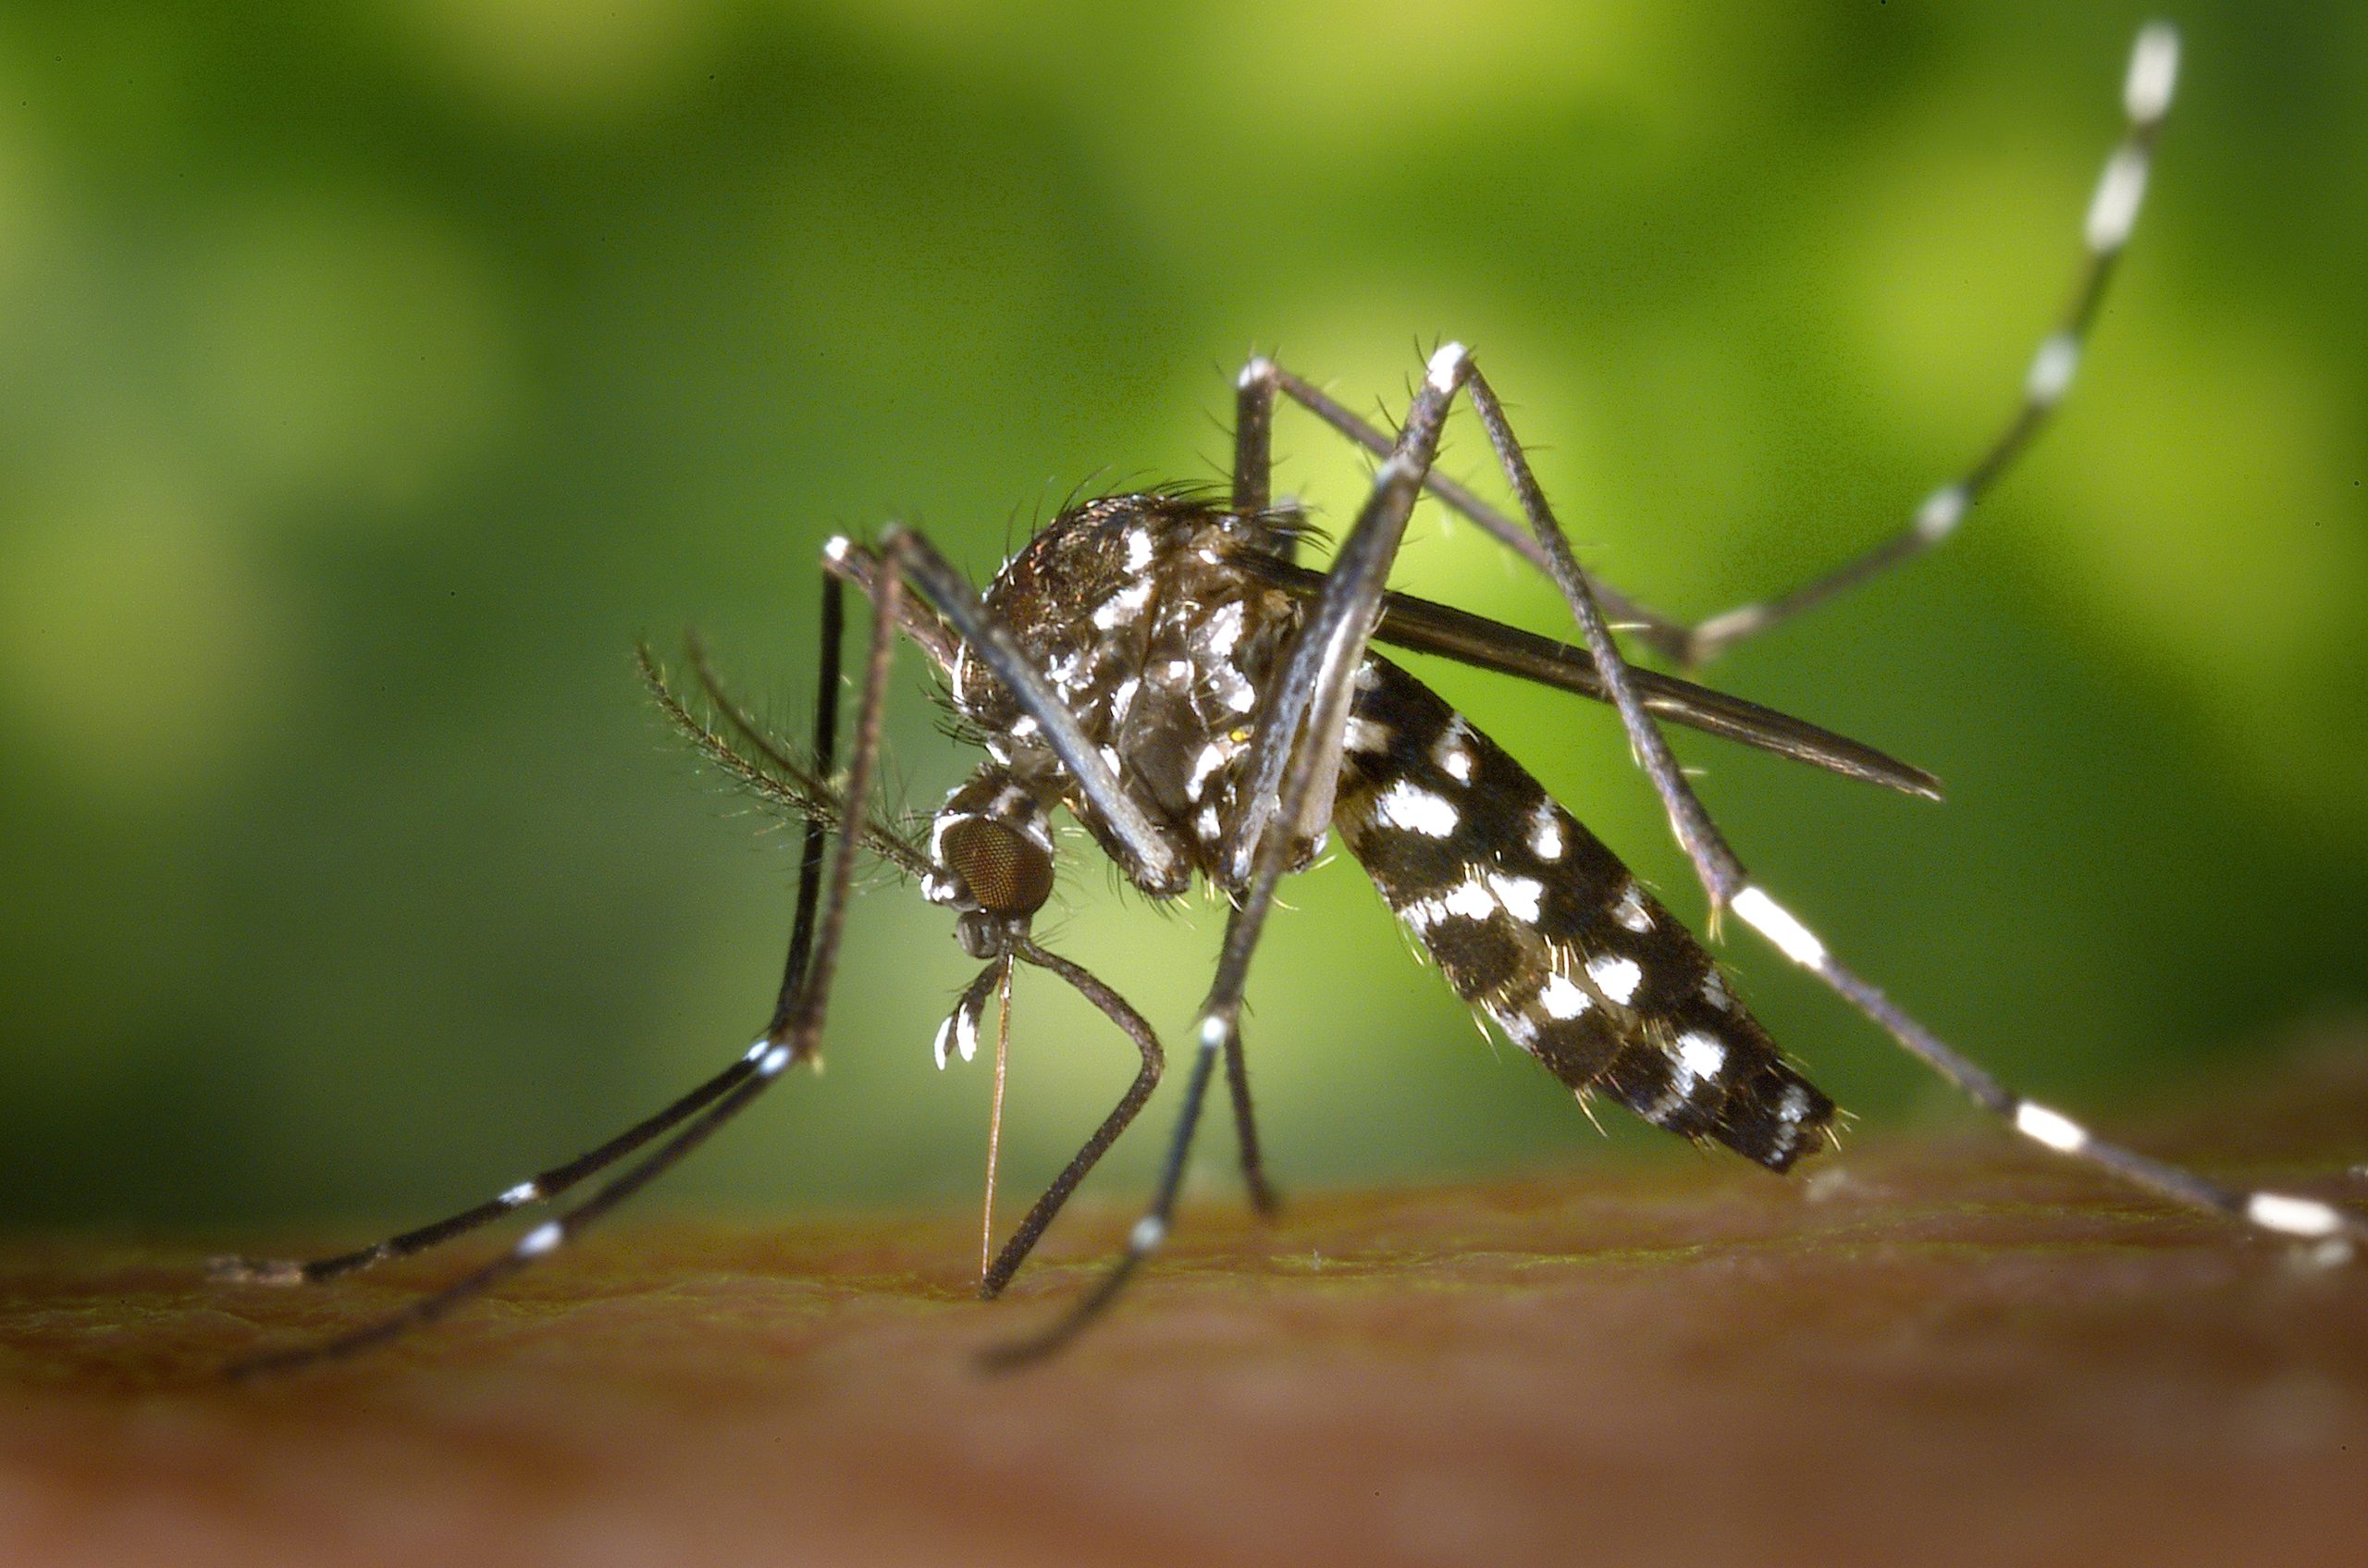 A form of tiger mosquito birth control and drones may help stem the spread of some tropical diseases. Image credit - James Gathany/CDC, public domain